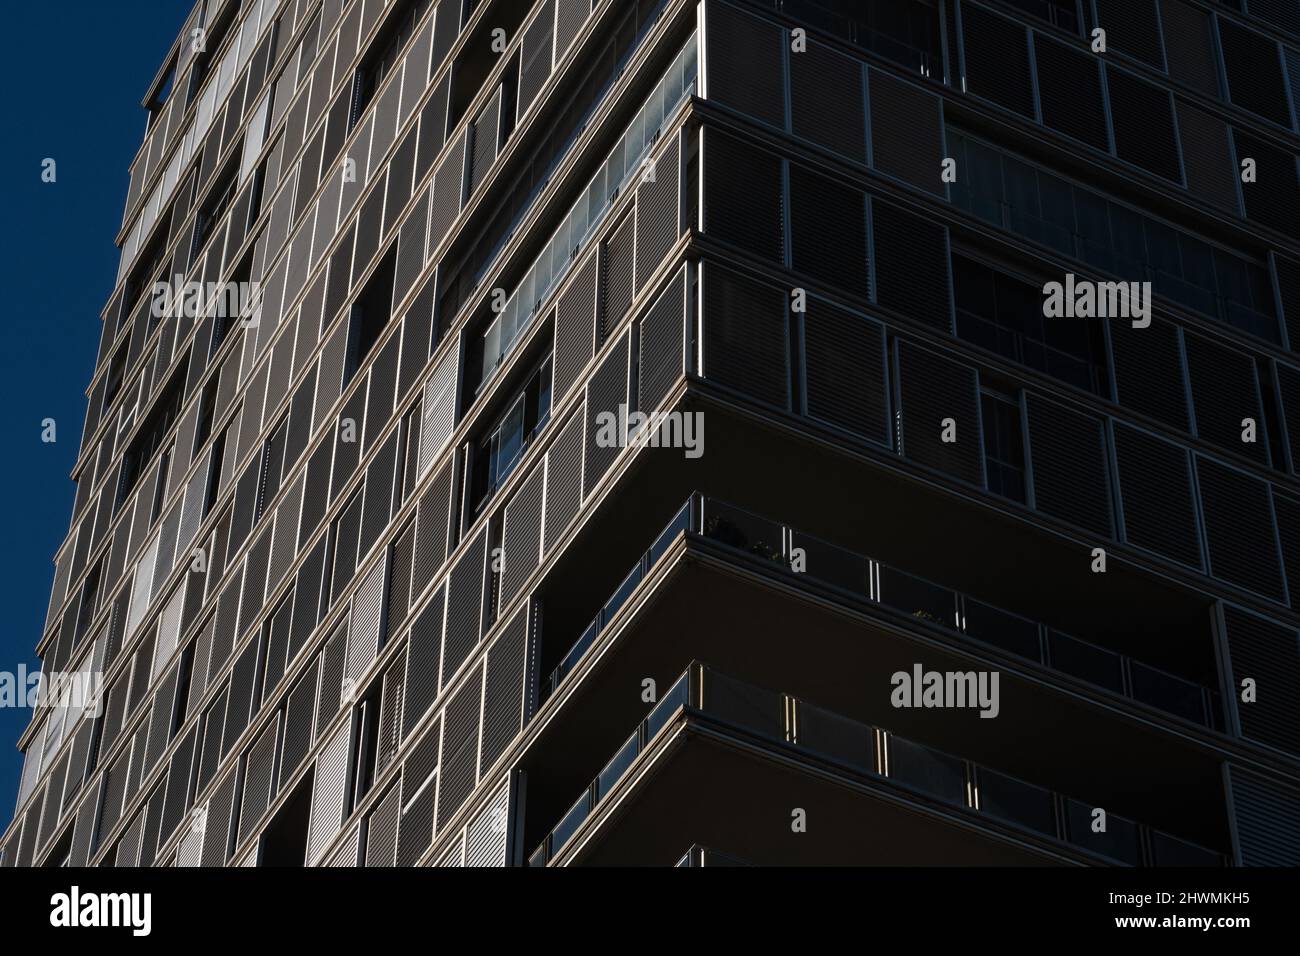 Facades of a modern building in Barcelona, Spain. Corner view. Stock Photo